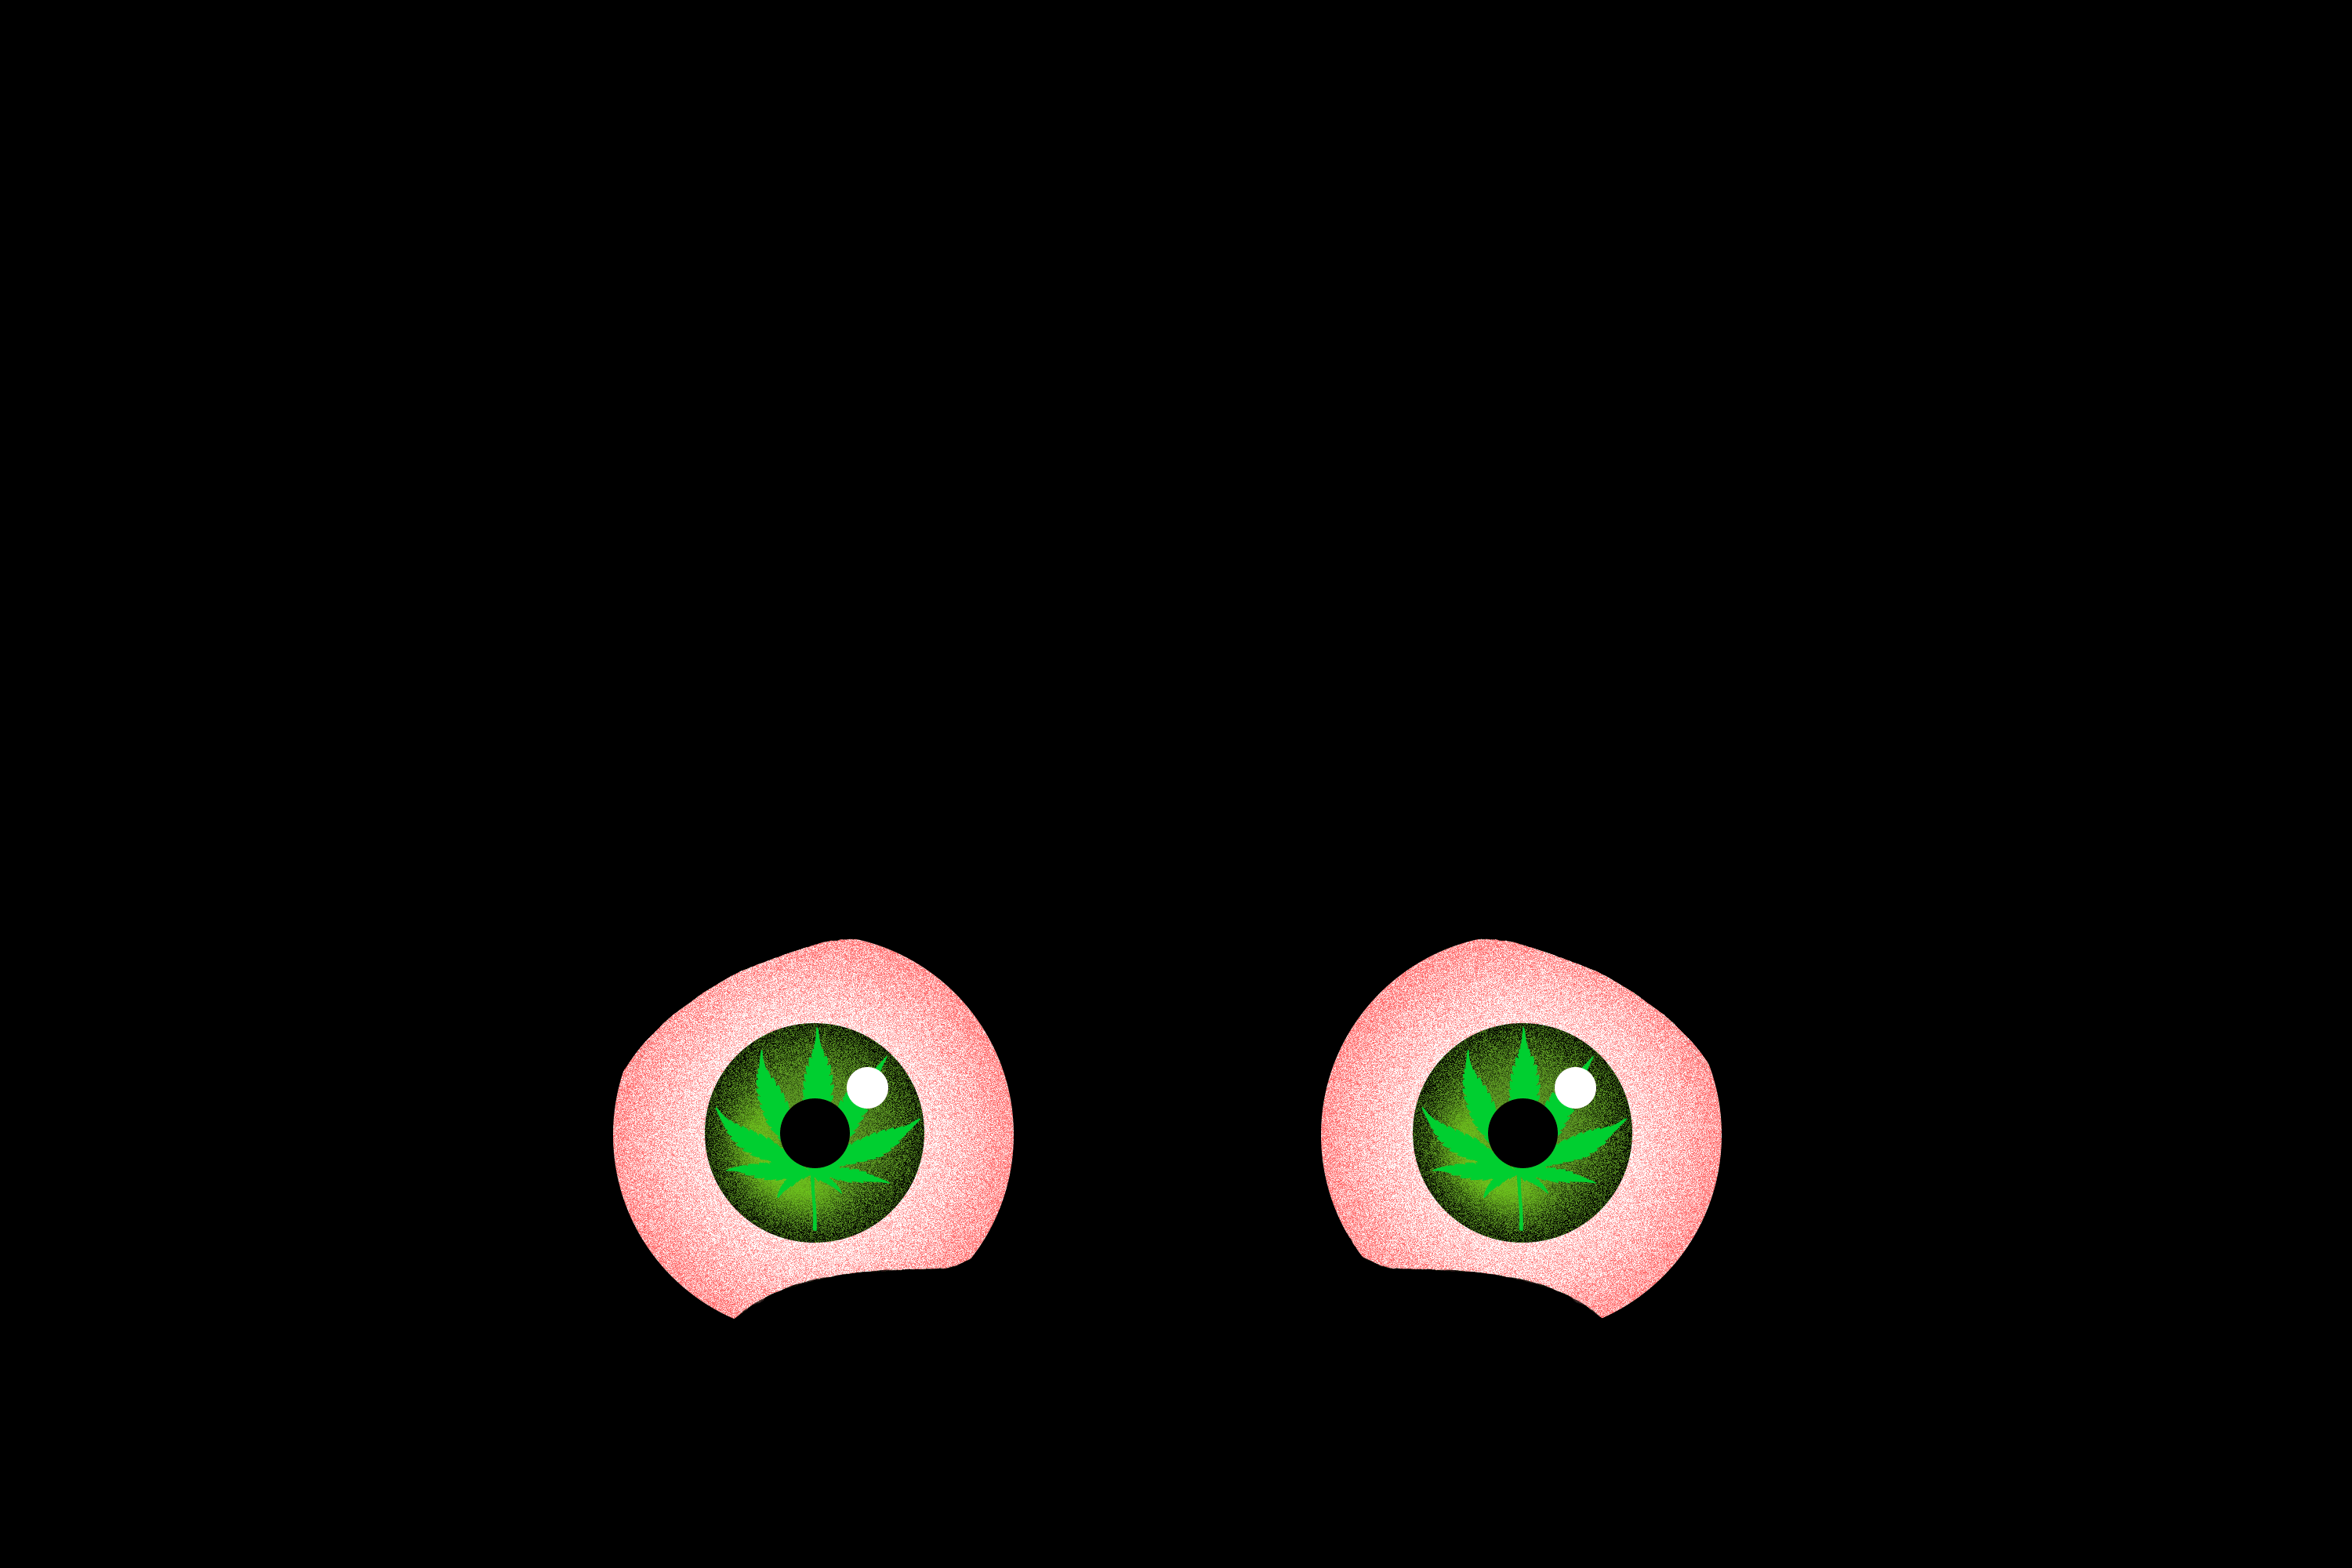 illustration of anxious eyes with cannabis pupils looking around on a black background.